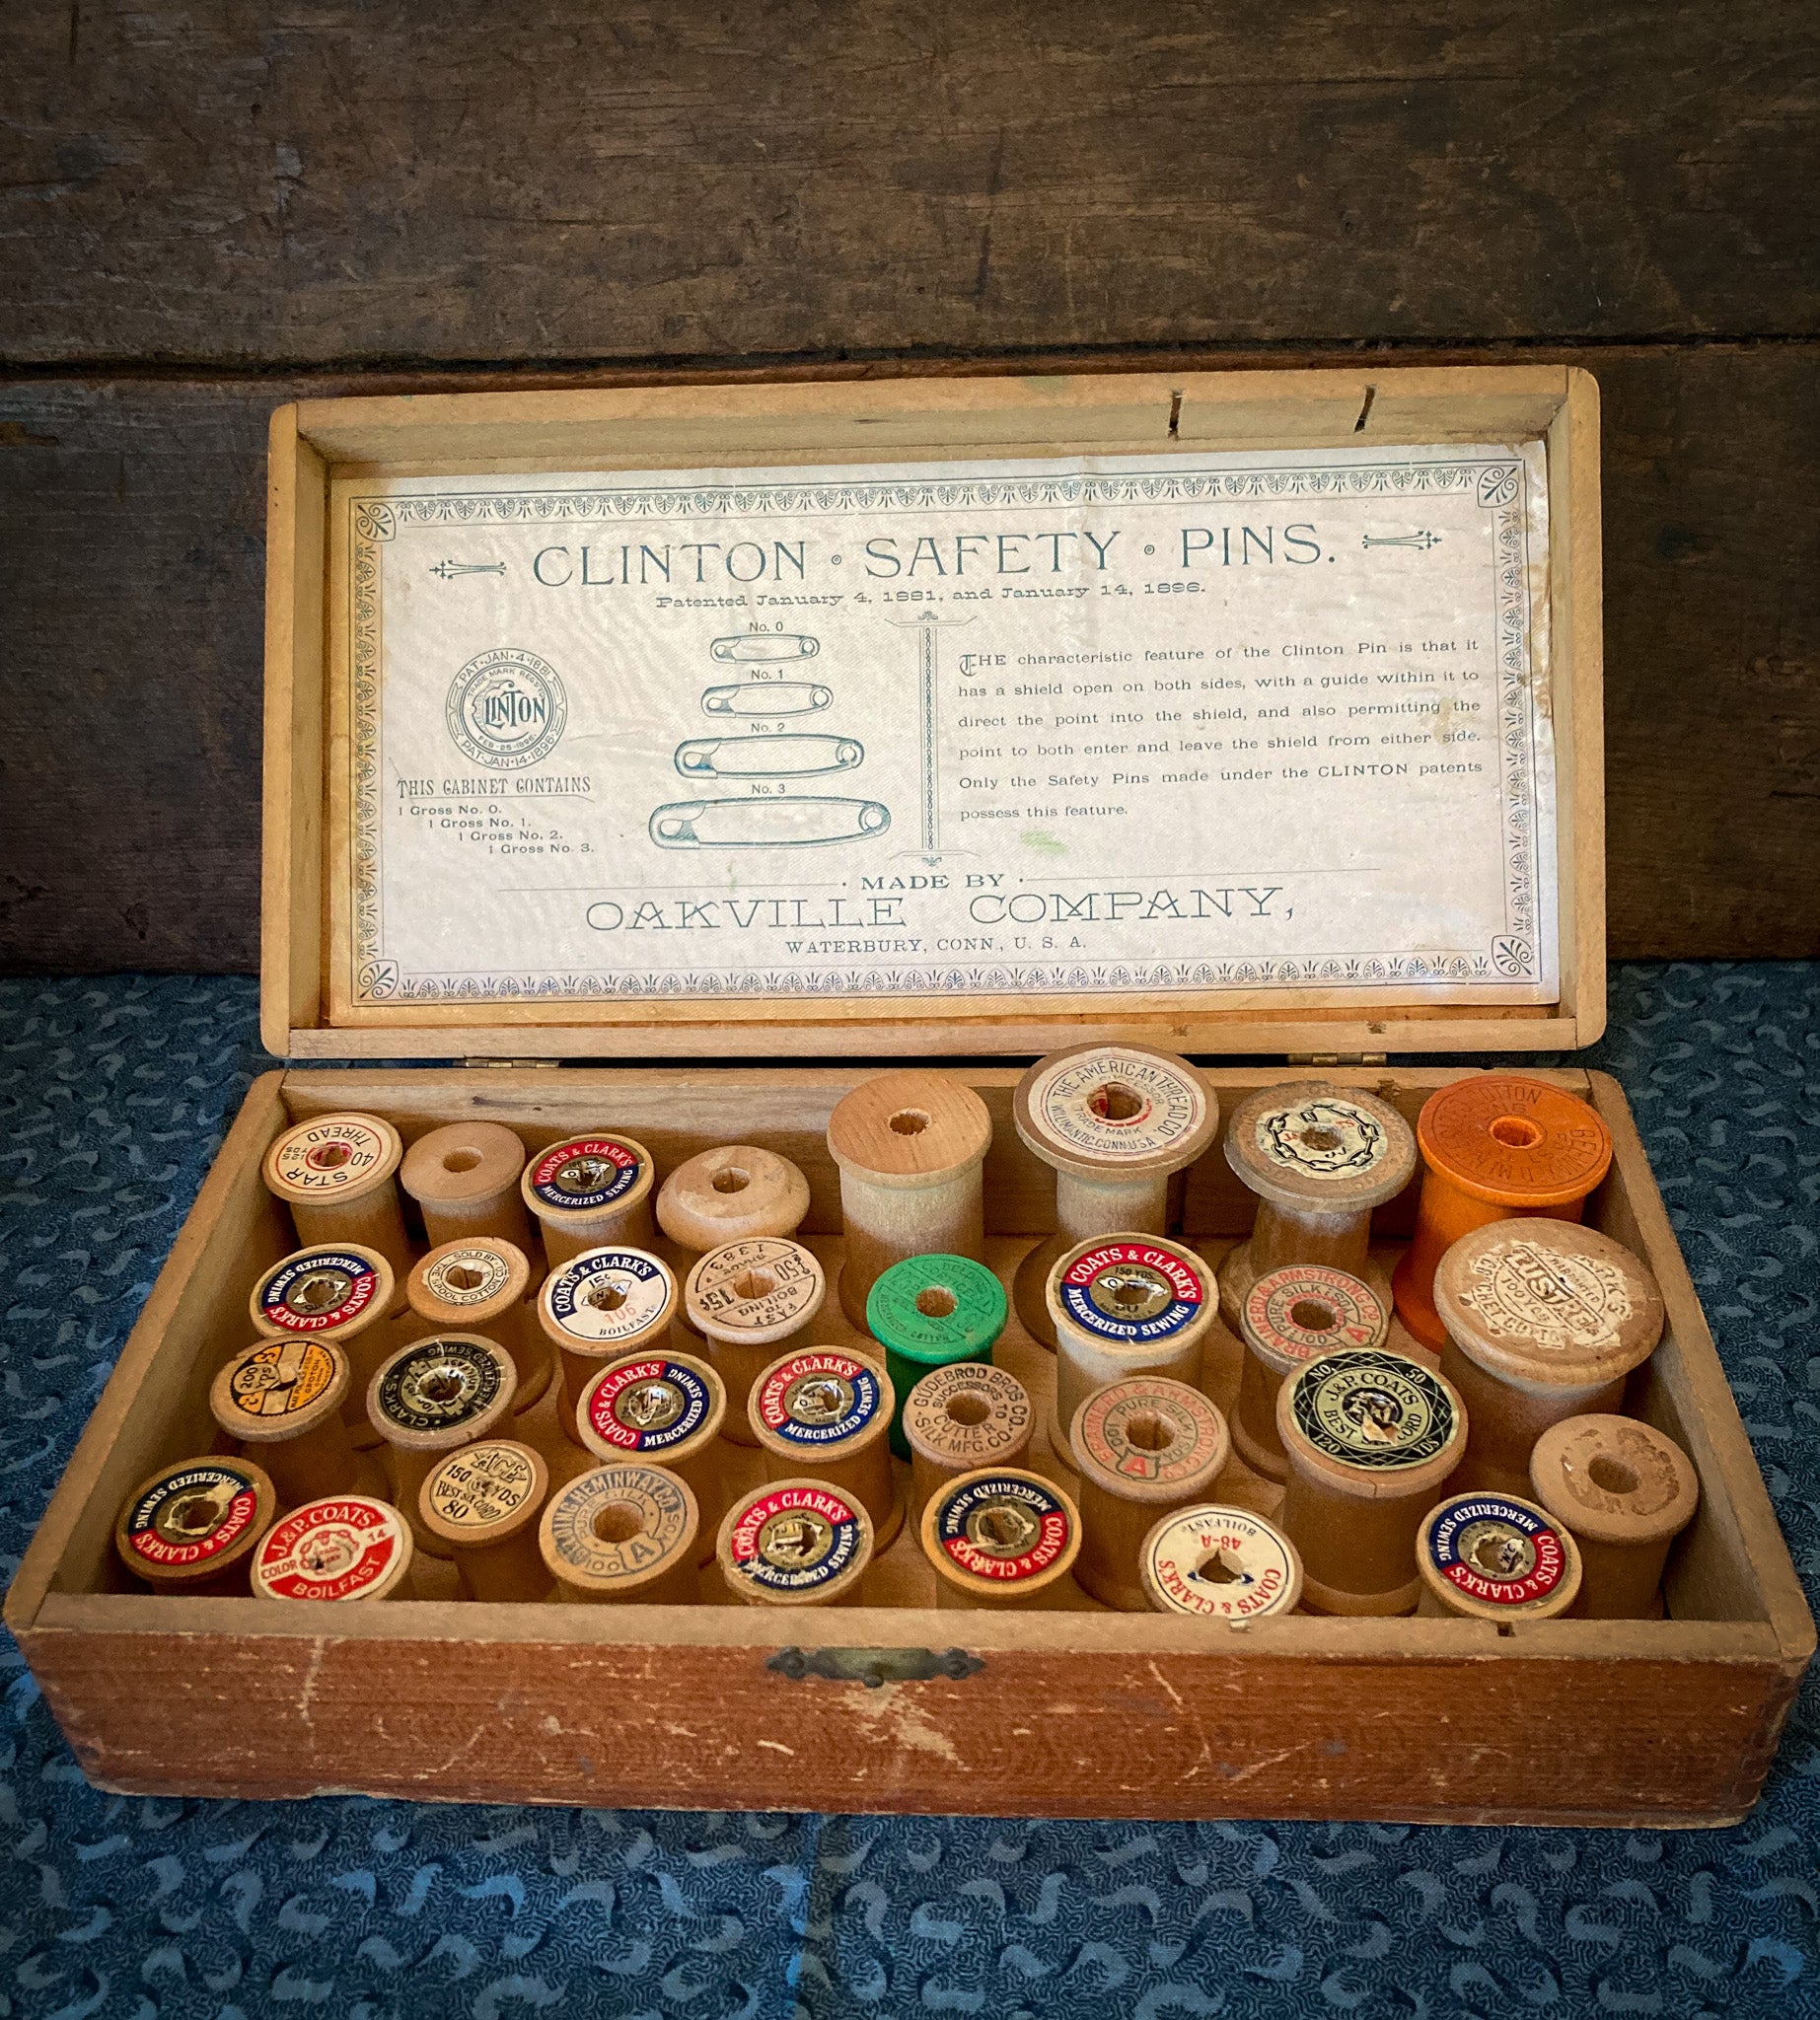 Late 1800’s “Clinton Safety Pins” Box with Wooden Thread Spools